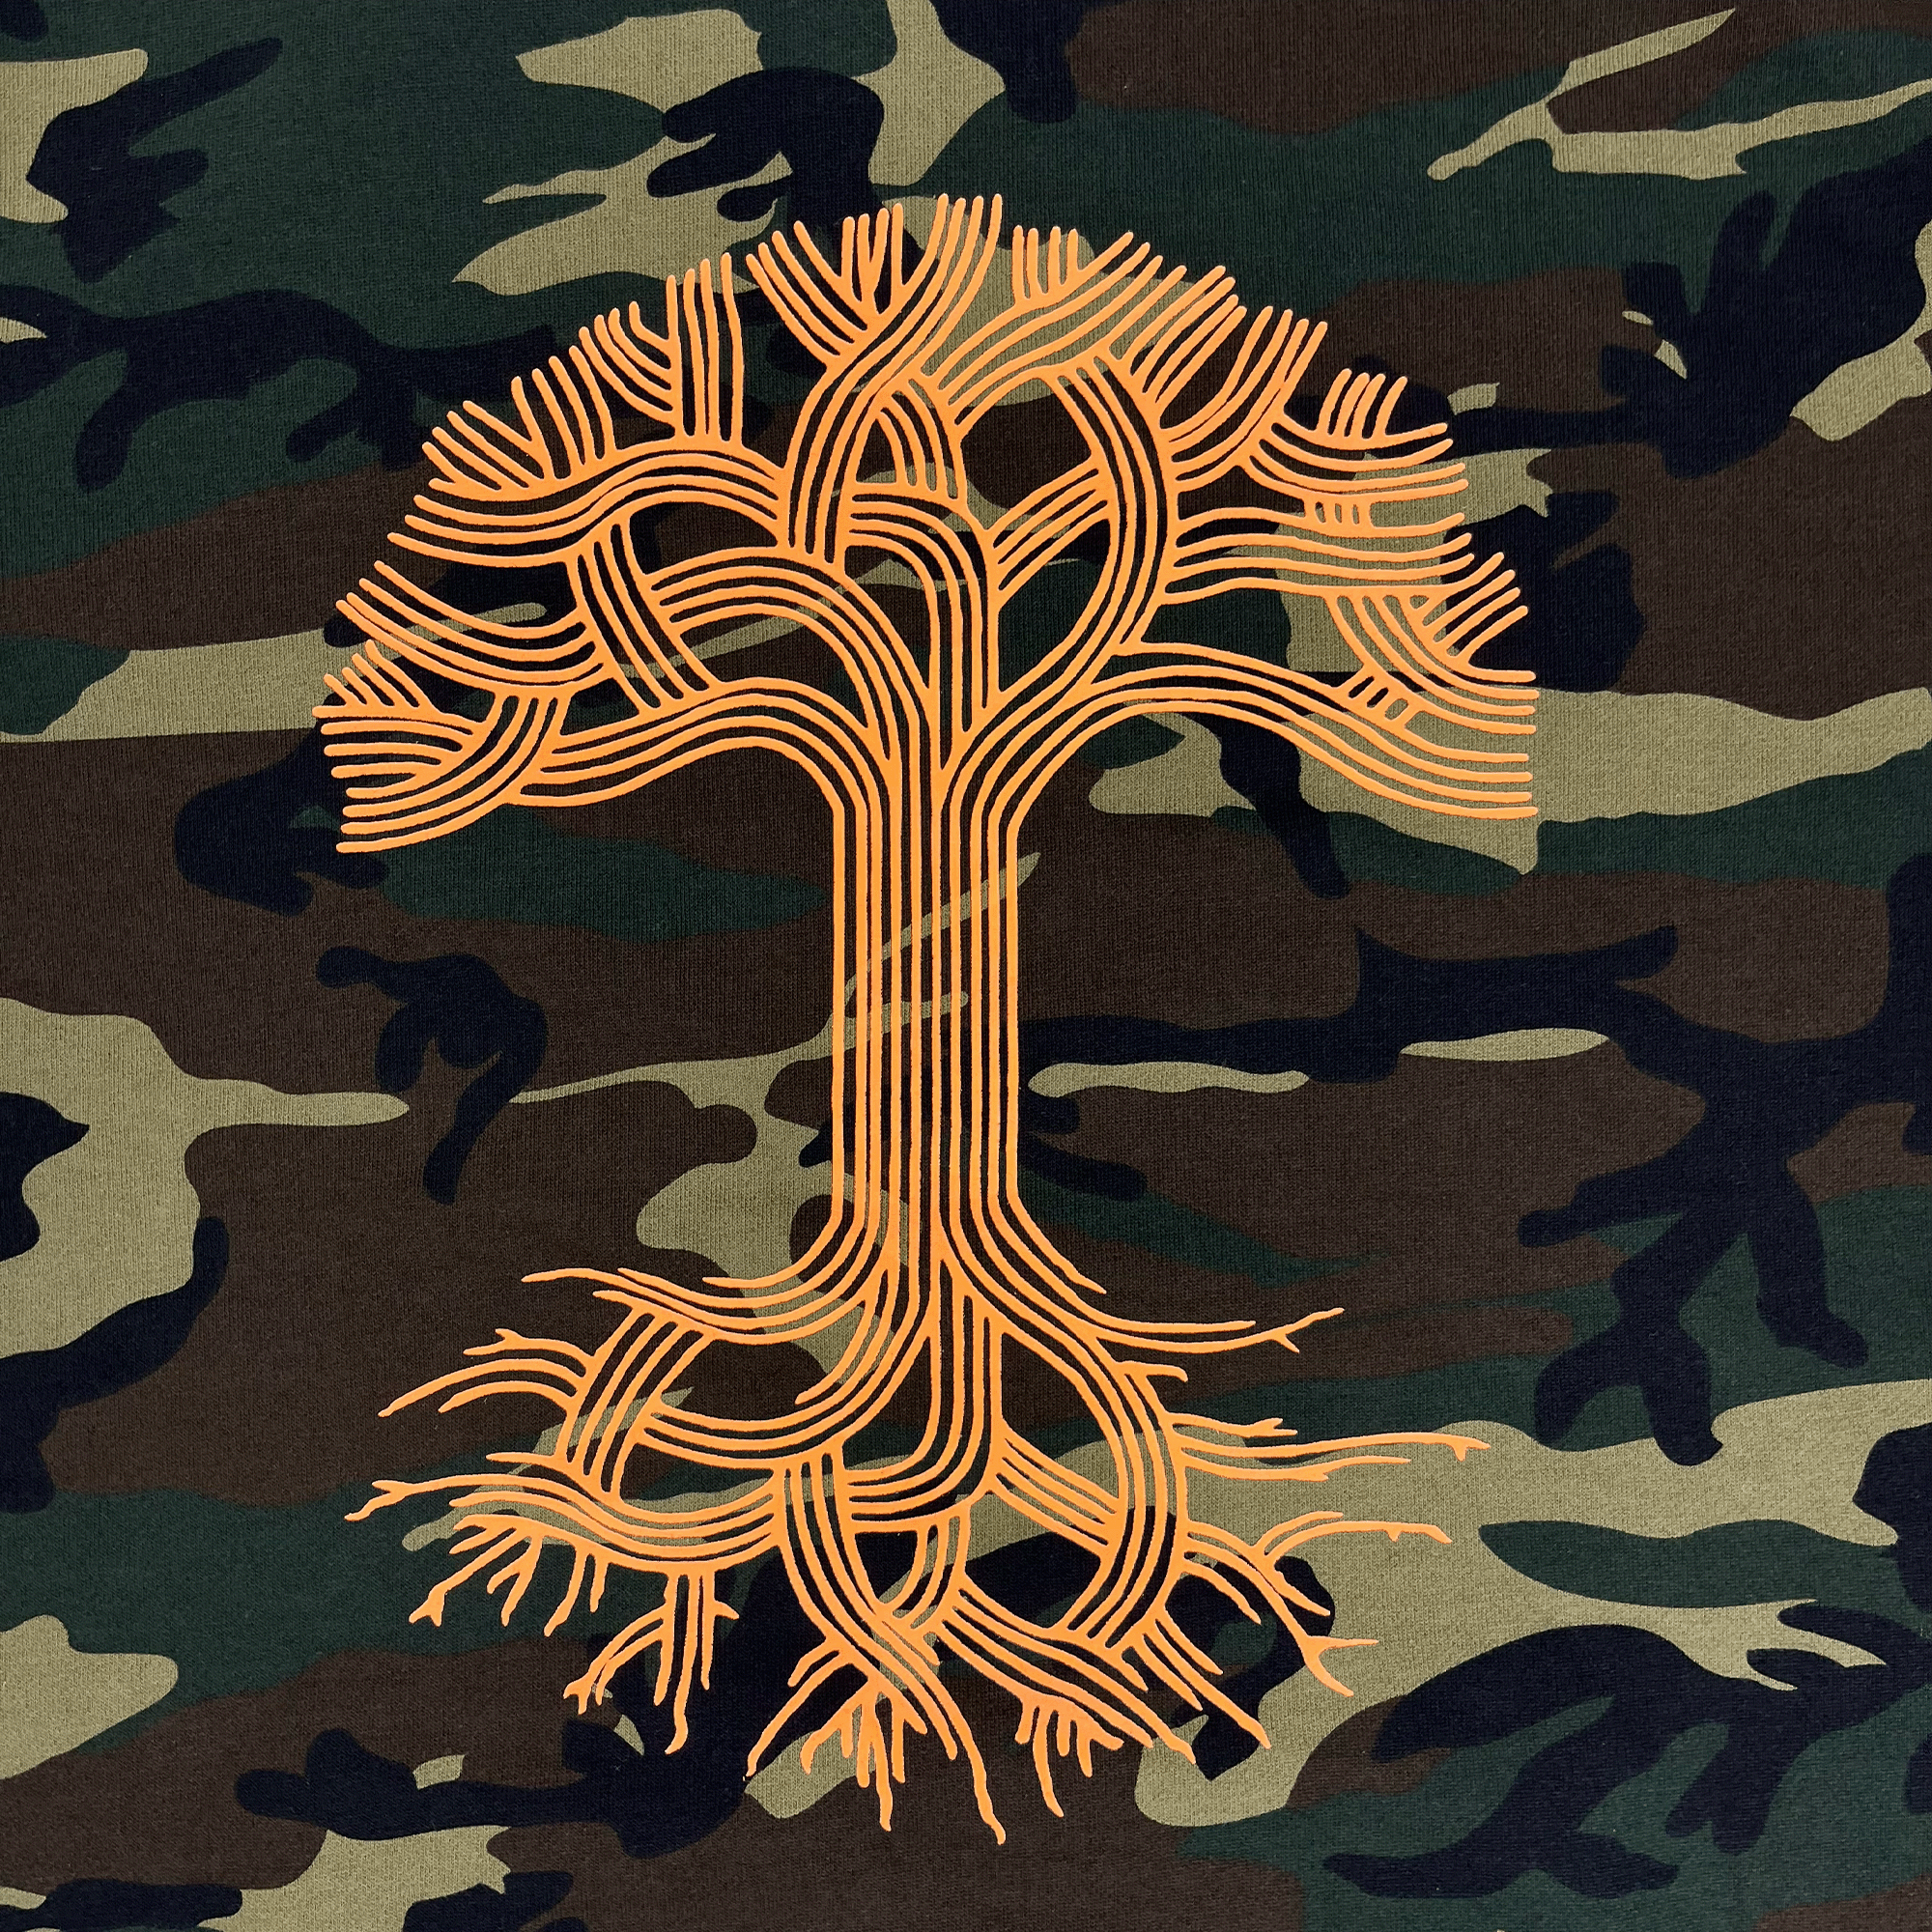 Close-up of a large orange Oaklandish tree logo in the center of a camo hoodie.